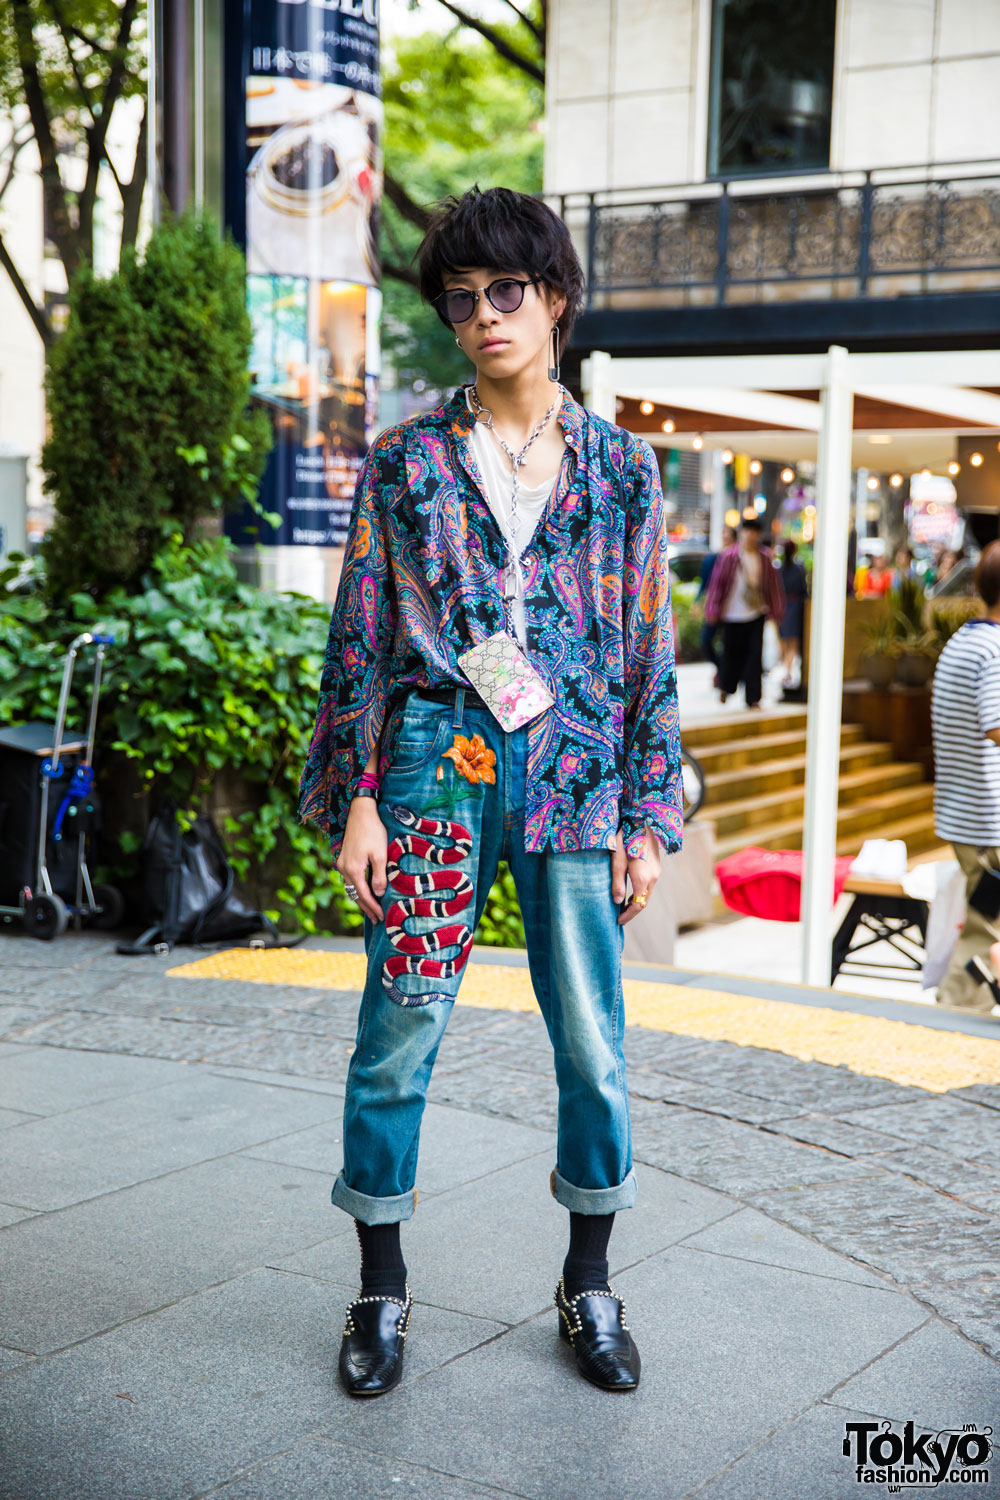 Harajuku Guy in Retro Street Style w/ Paisley Shirt, Gucci Patch Jeans & Vintage Shoes